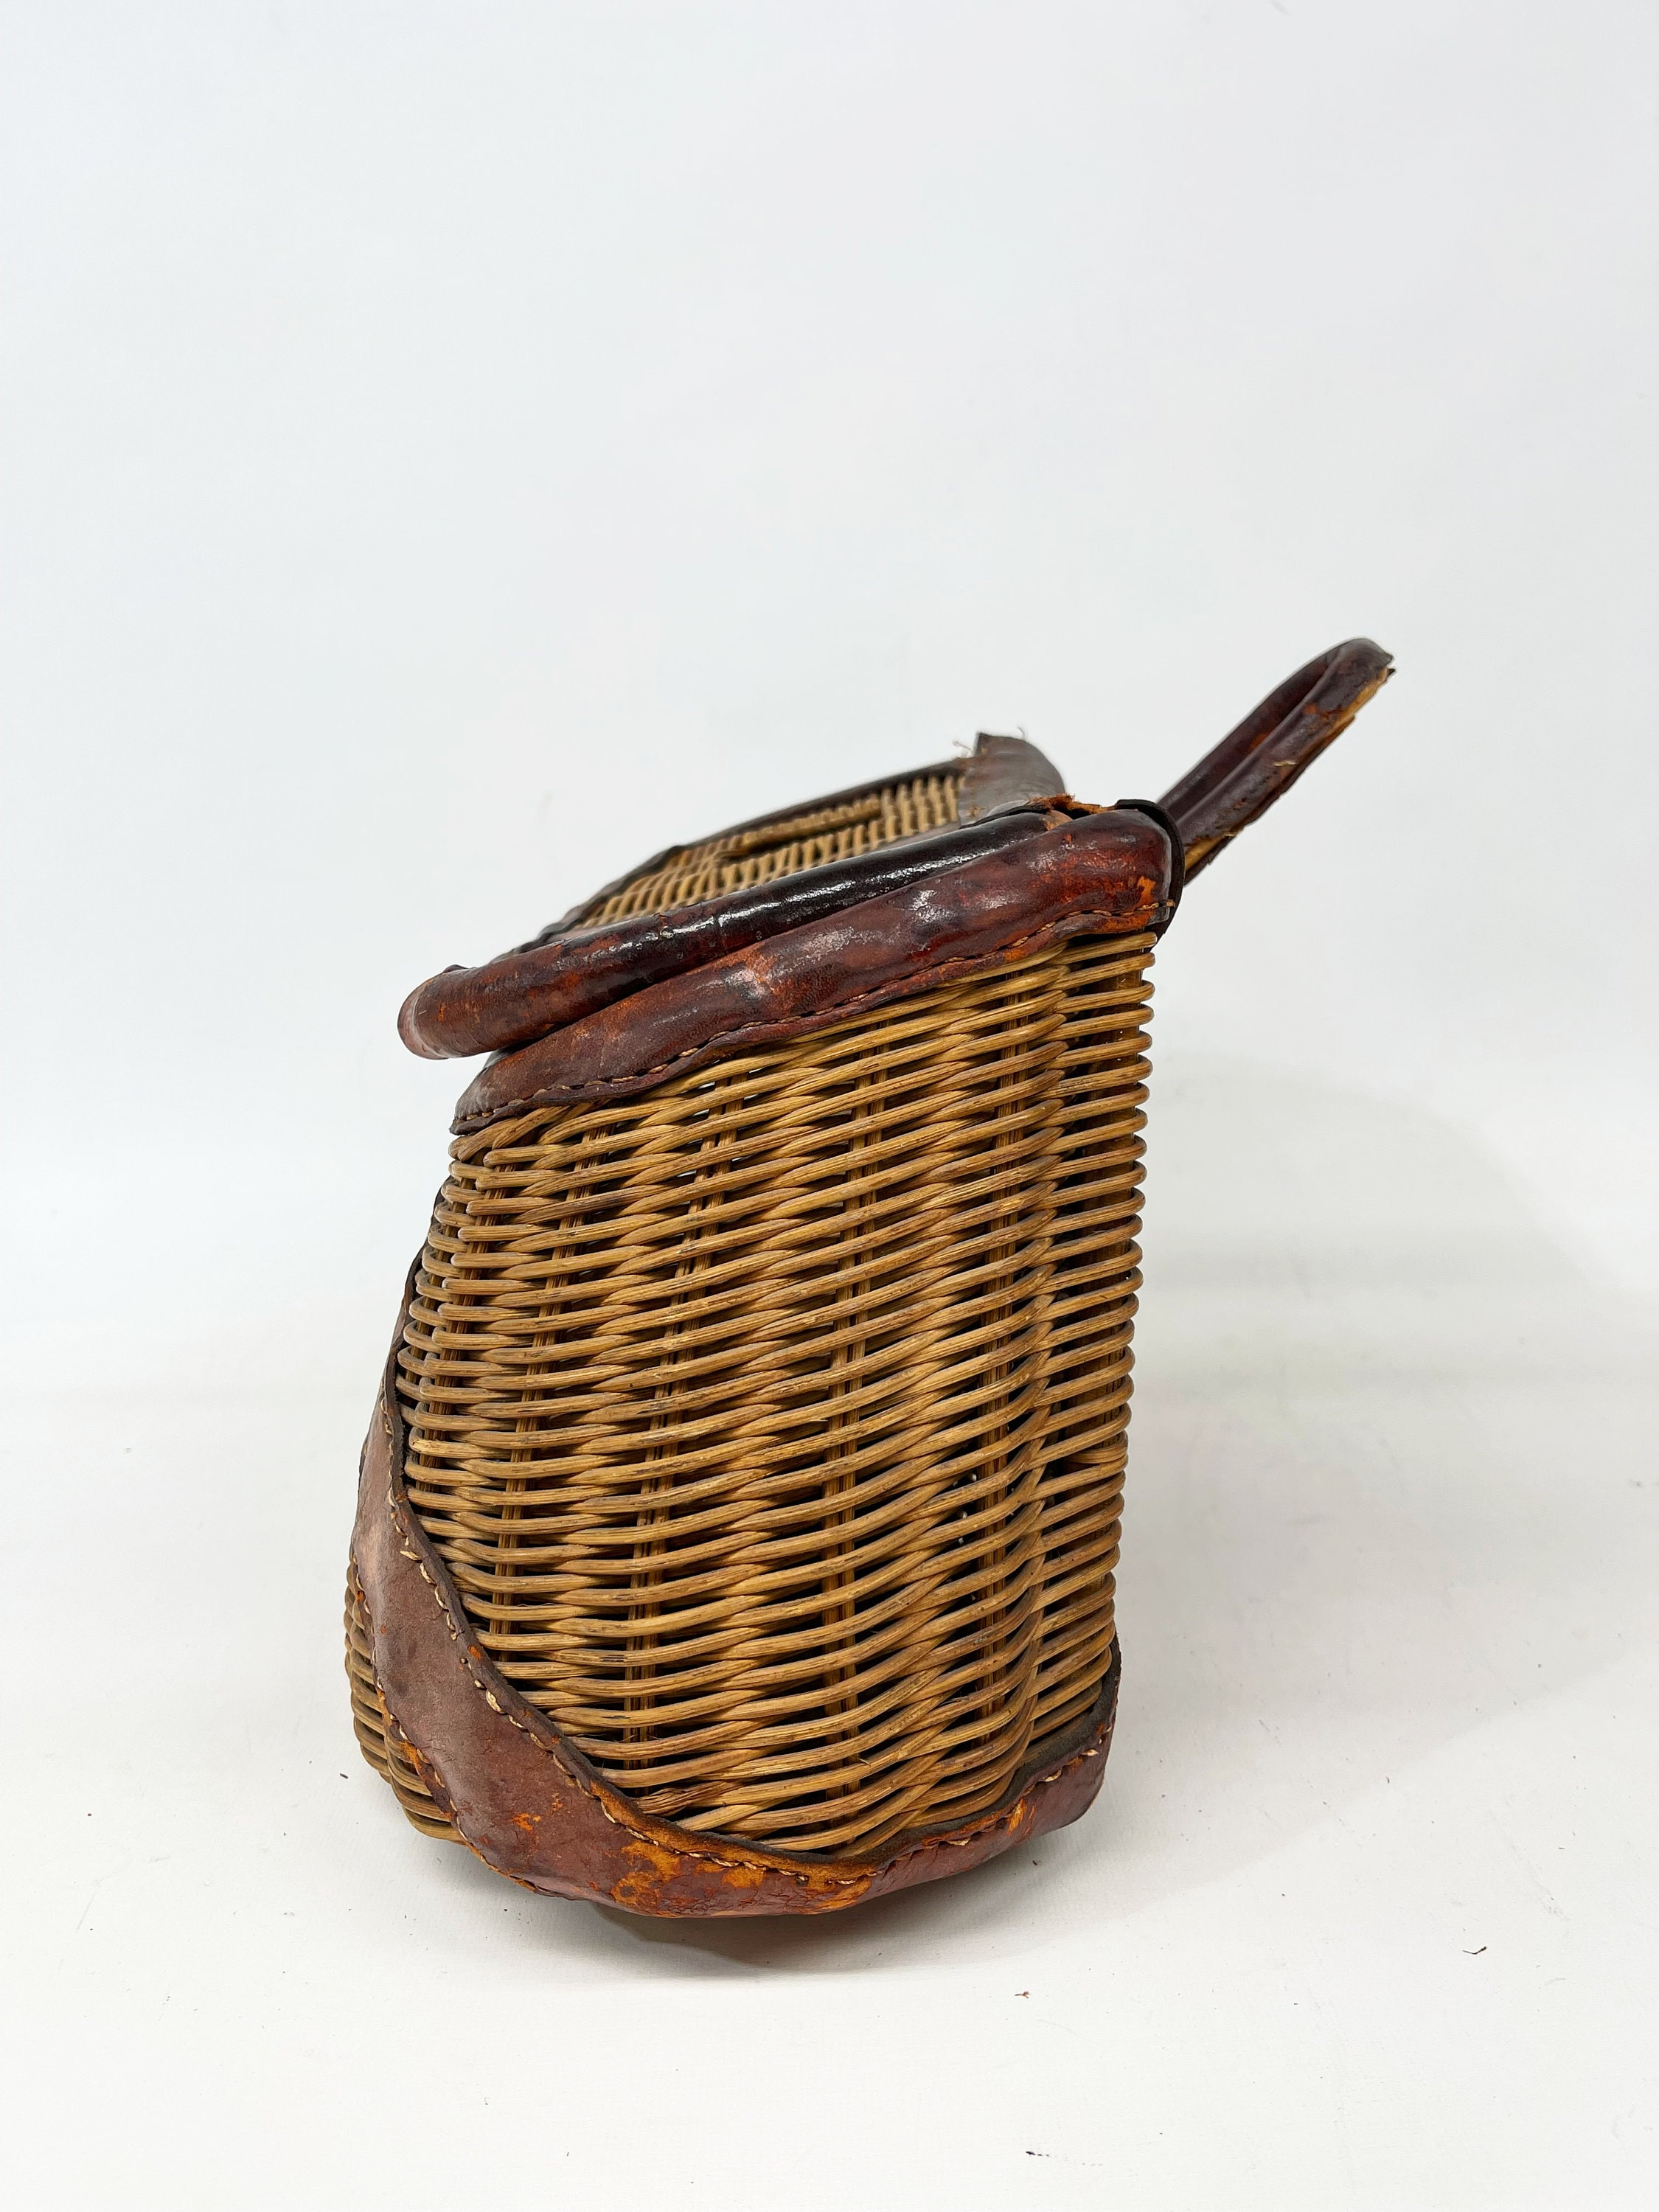 Vintage Fishing Creel, Wicker Basket, Rustic Cabin and Lodge Decor